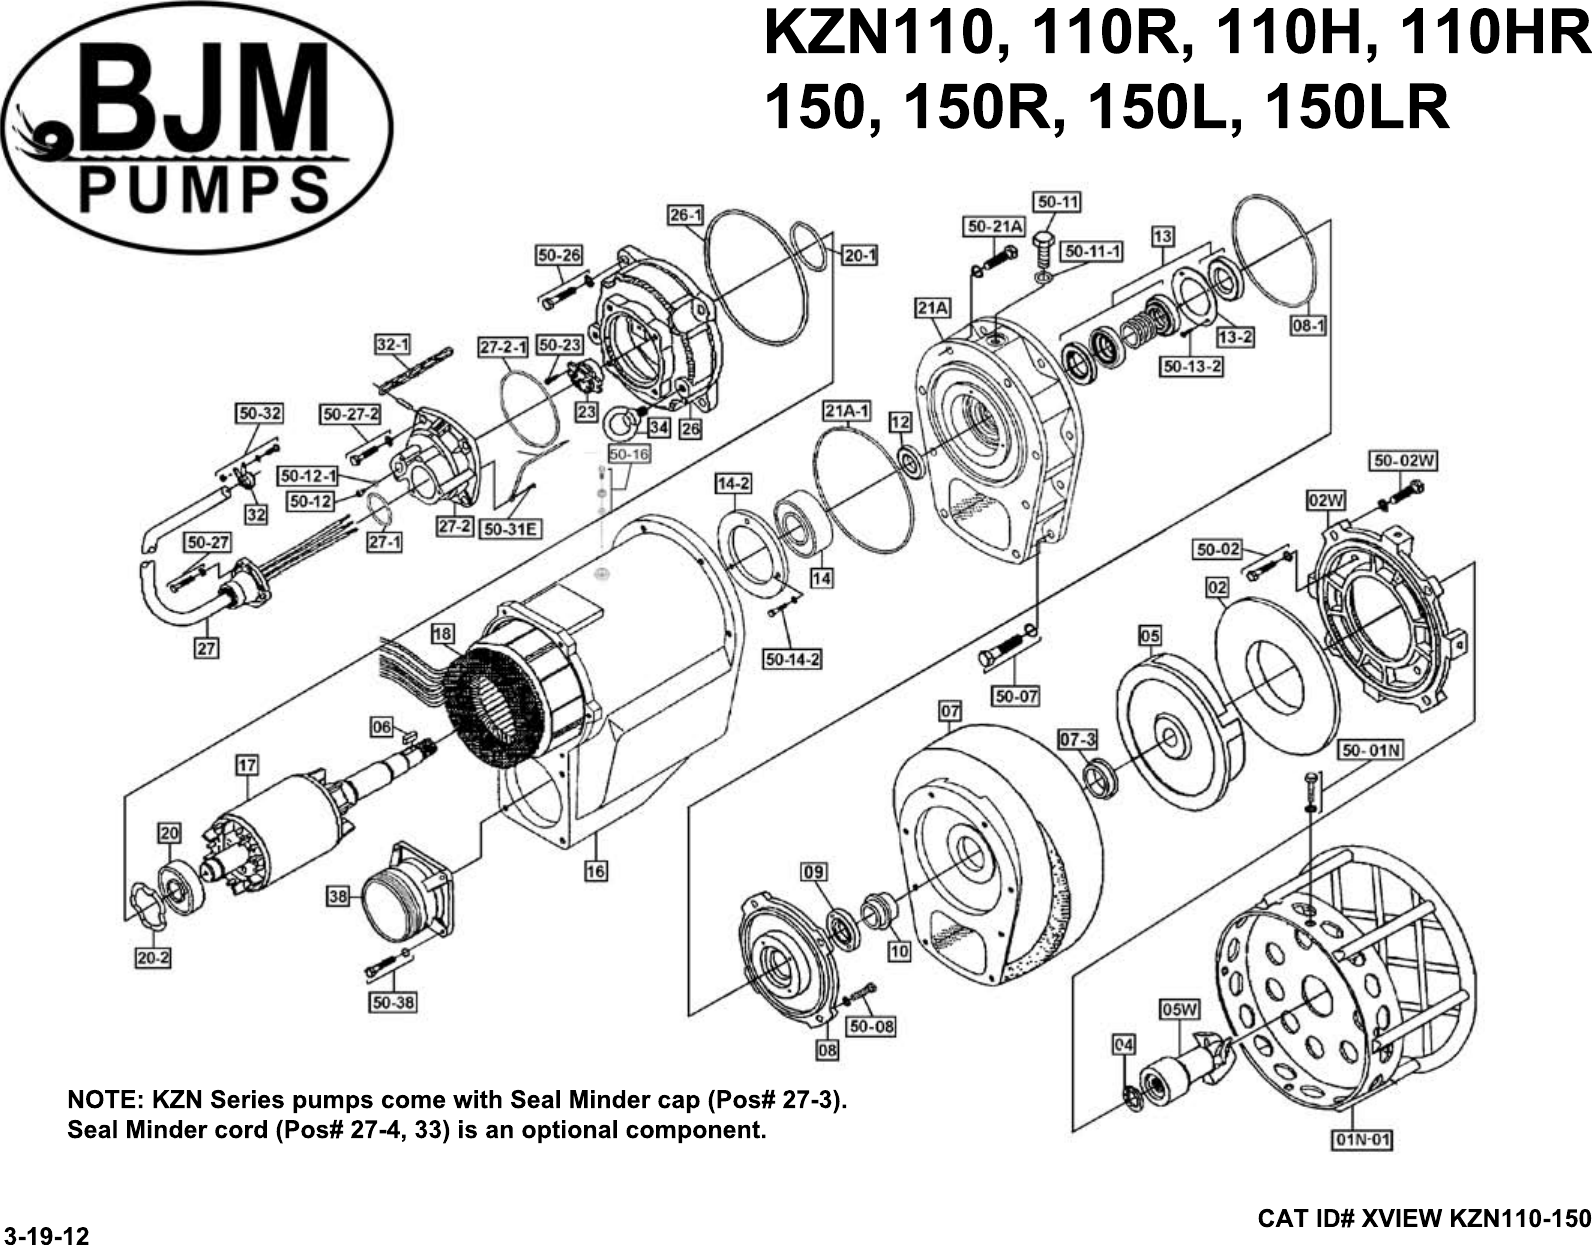 Page 2 of 3 - 136051 5 Bjm Kznr Exploded View User Manual